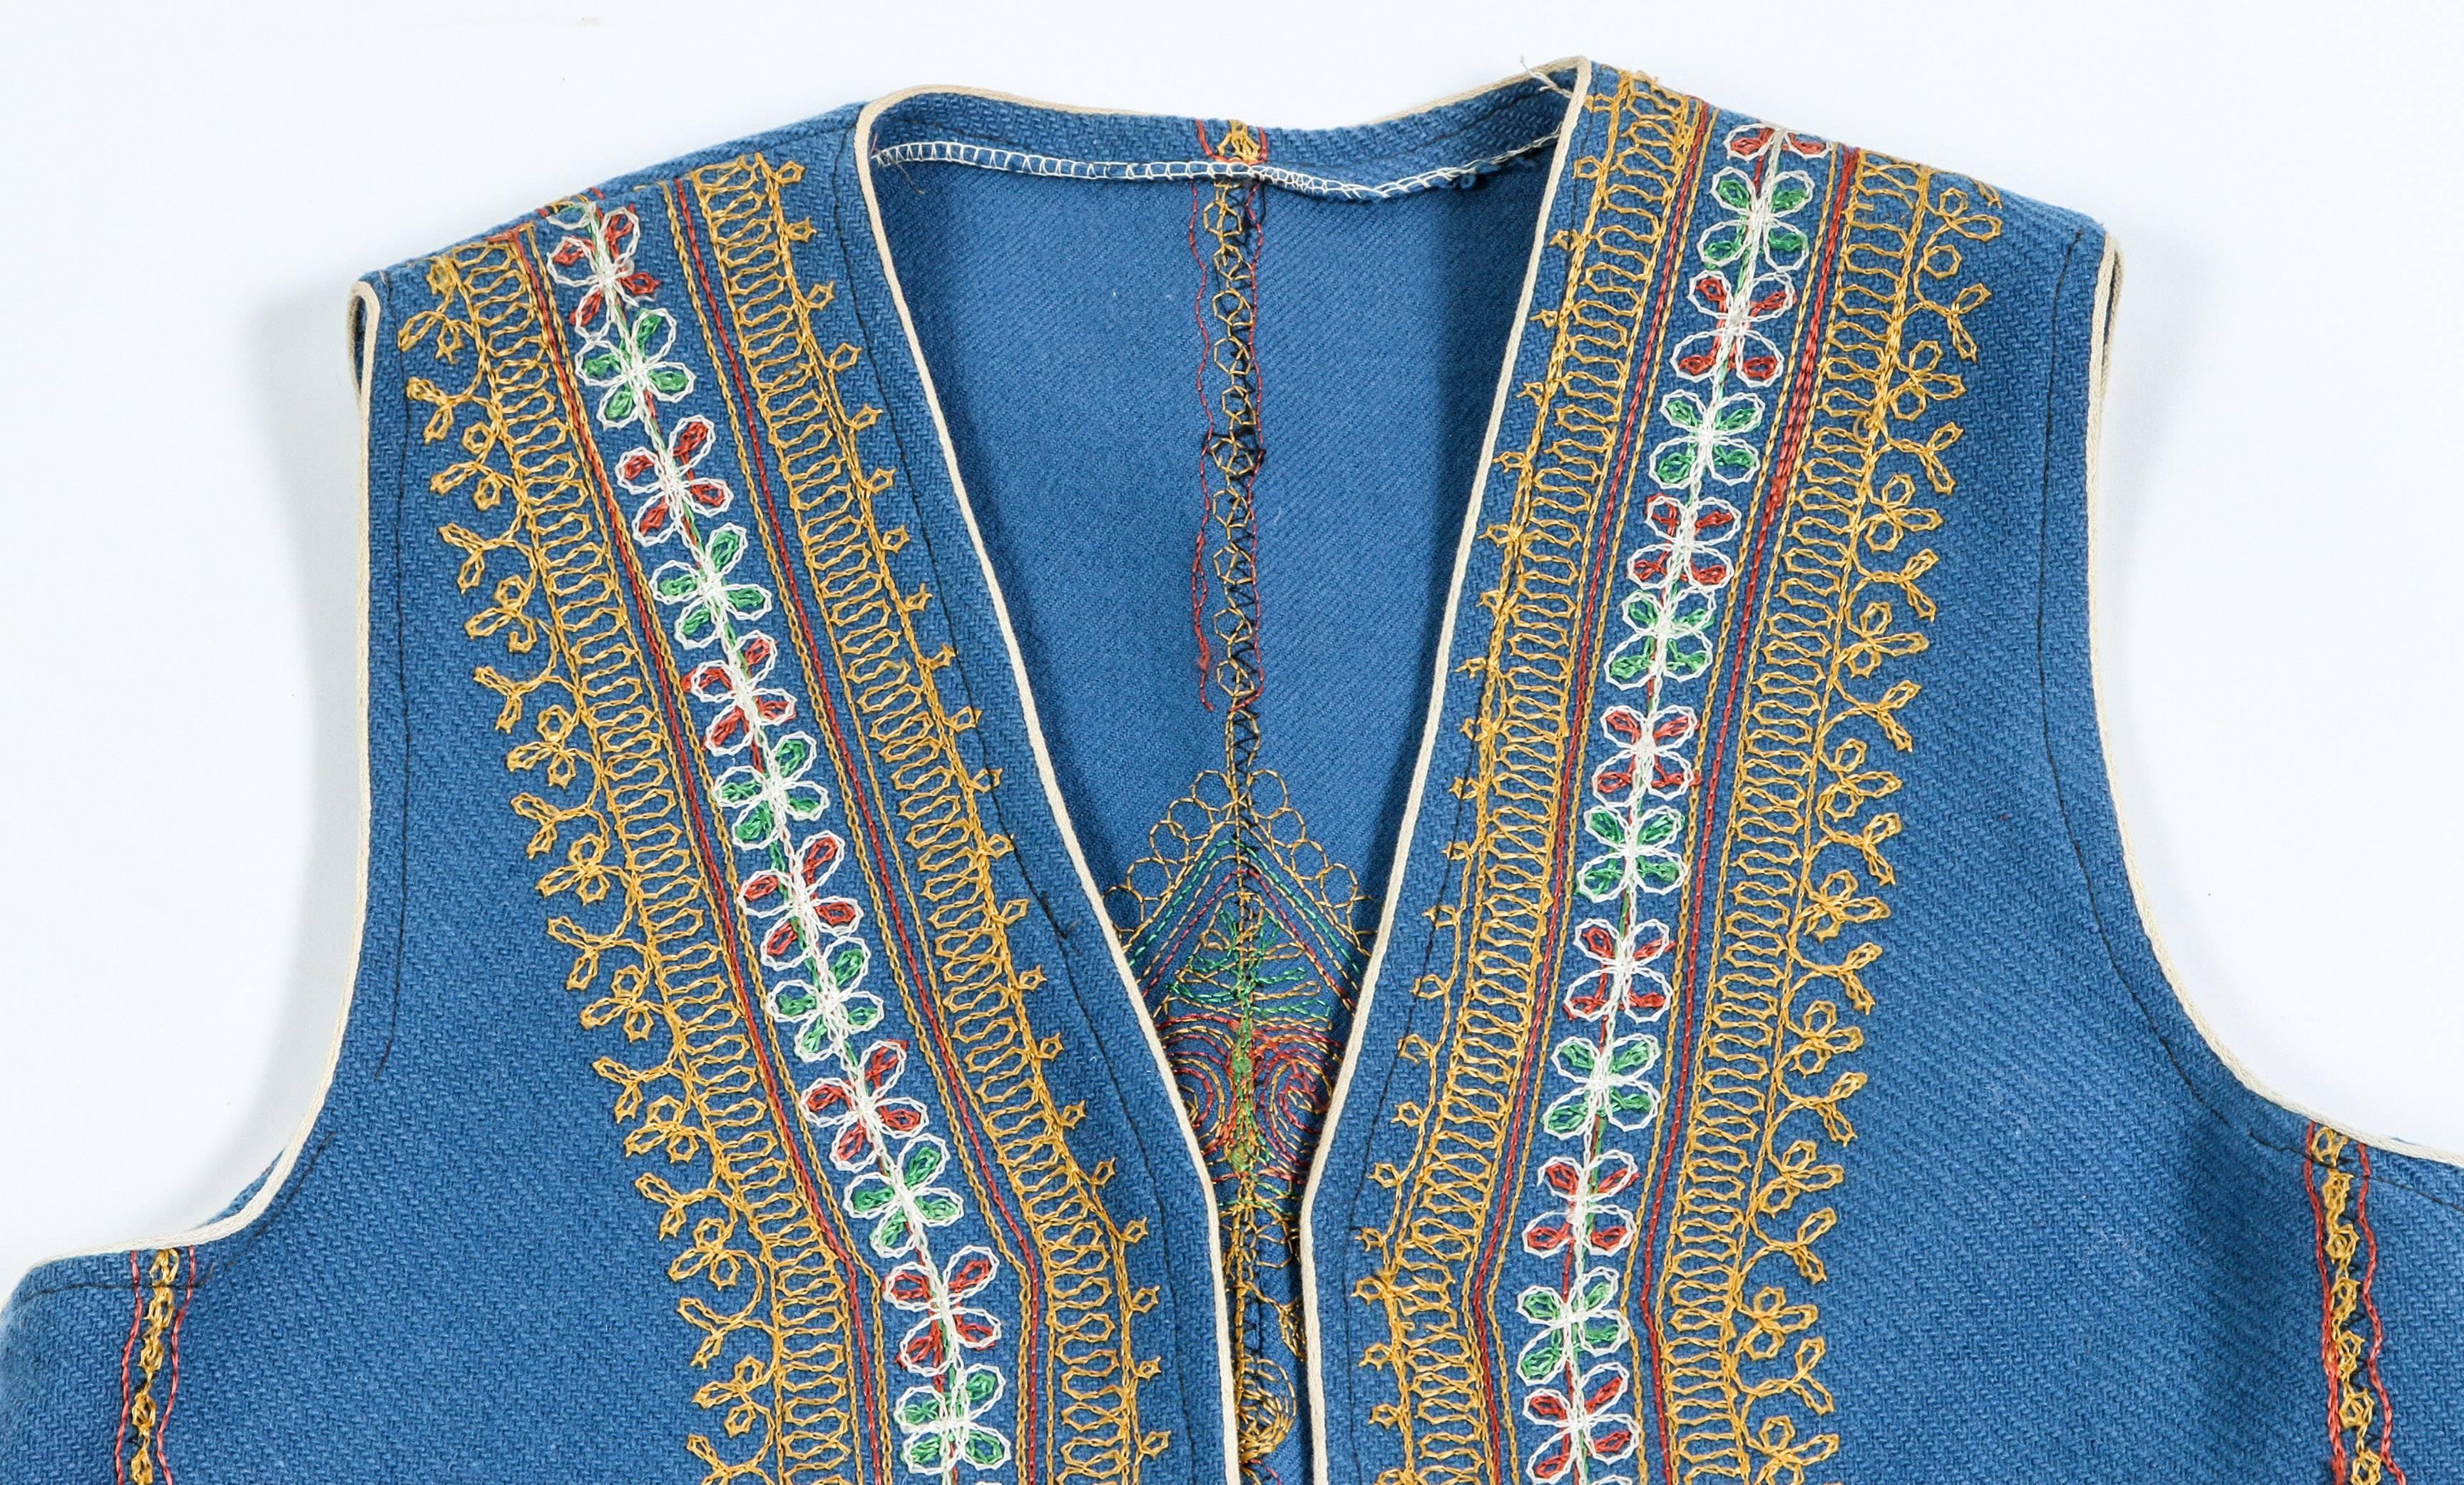 Authentic Ottoman Turkish vest in blue decorated with elaborate embroidered and two pockets,
Part of the traditional Turkish folk costume. 
Measurements: 
height 24.5"
armpit 19".